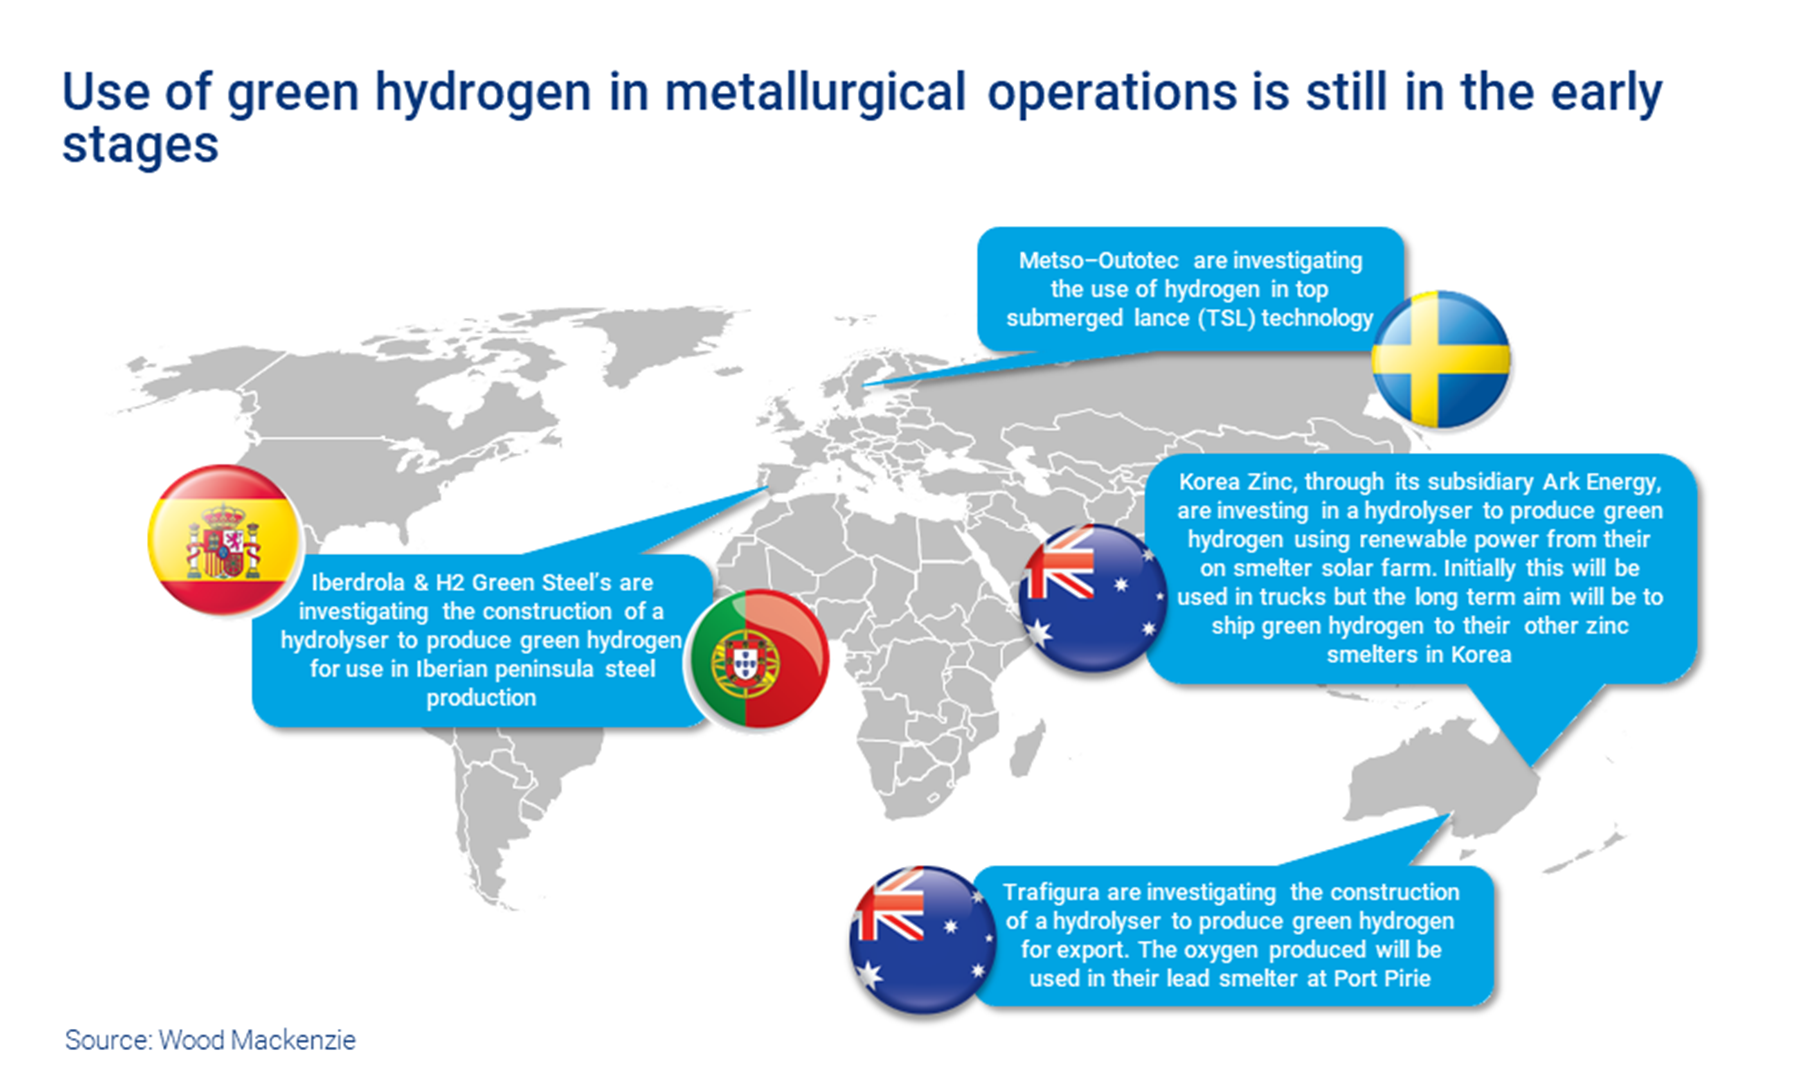 Chart shows use of green hydrogen in metallurgical operations is still in the early stages